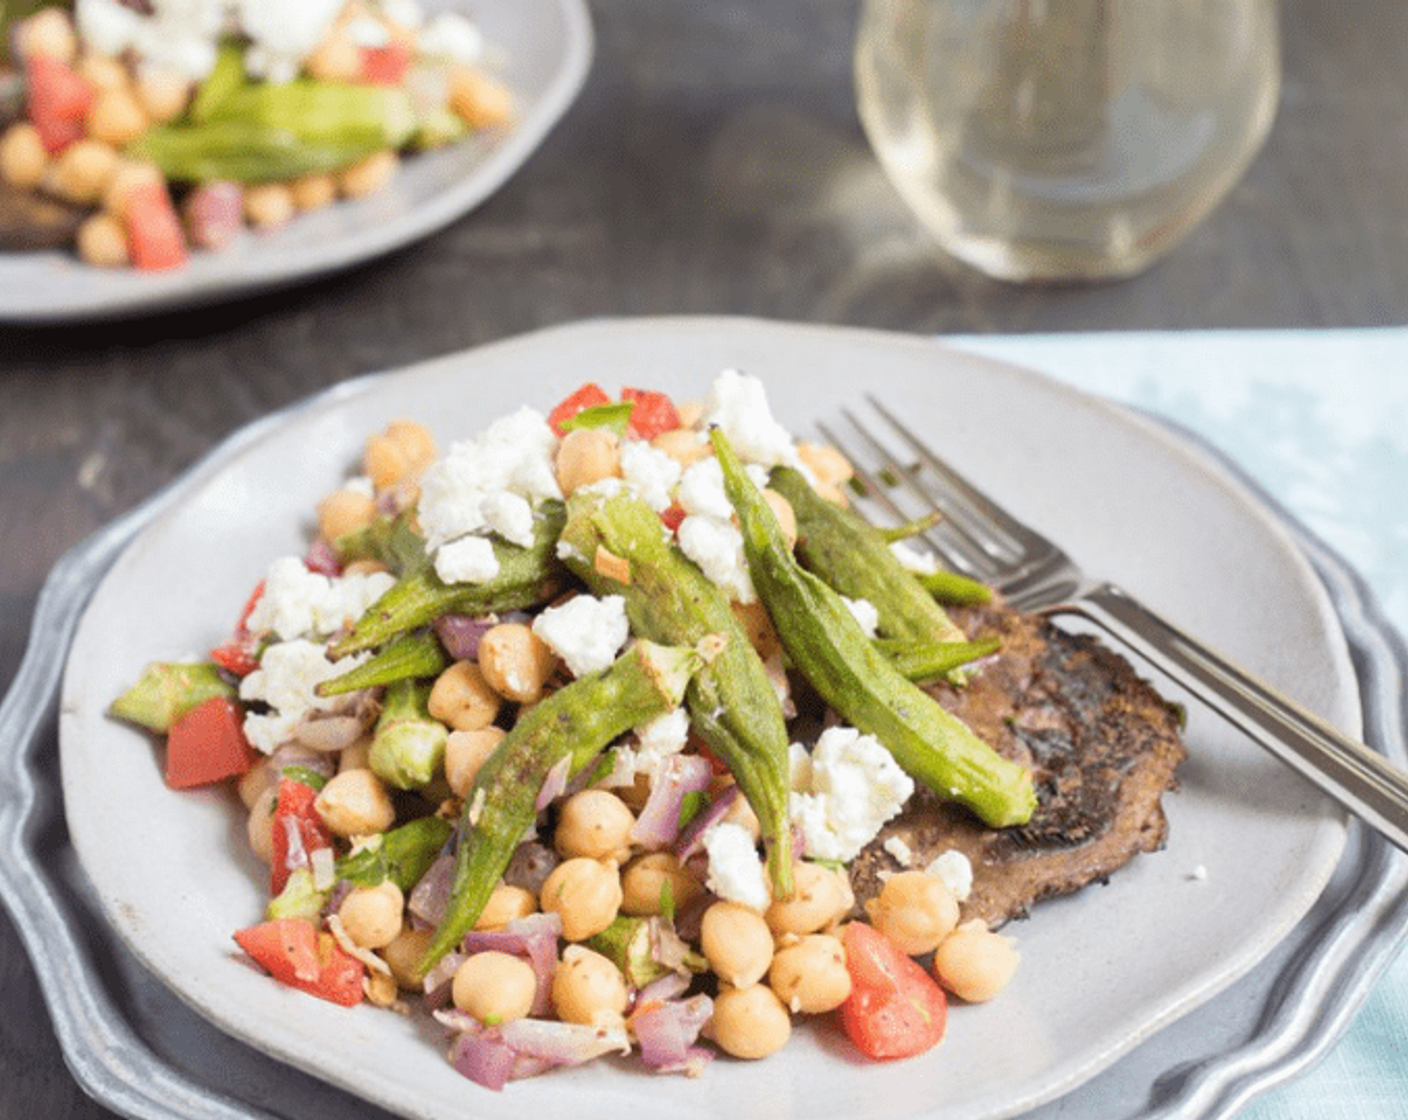 Roasted Portabella Mushroom Topped with Okra and Chickpea Salad